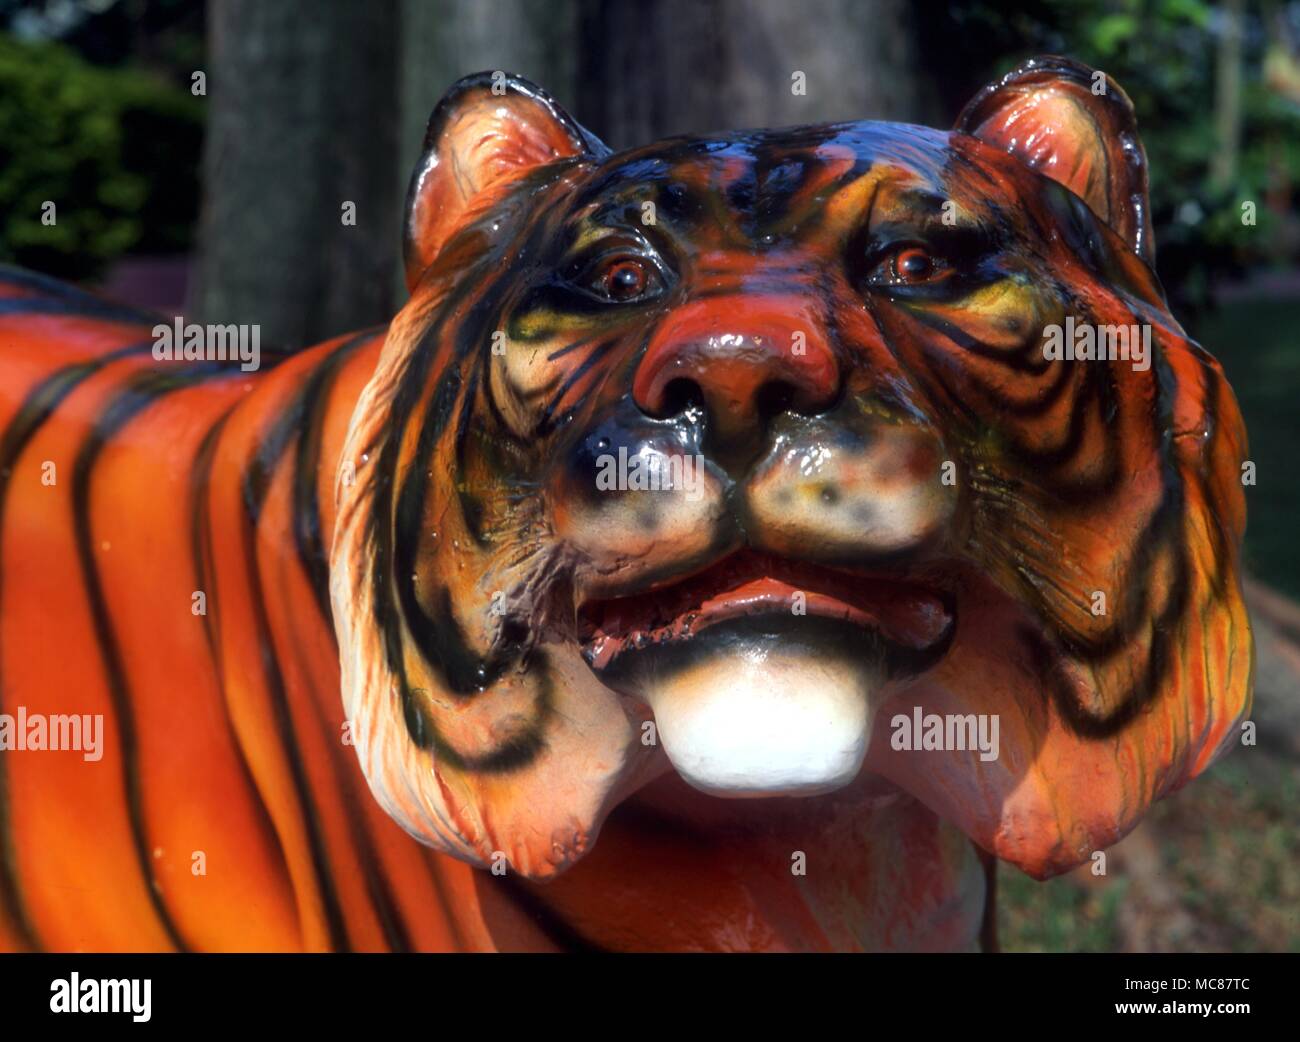 Chinese Mythology The Tiger Head of the Tiger Chinese Mythological subject in Haw Par Villa (Tiger Balm Park) in Singapore Stock Photo